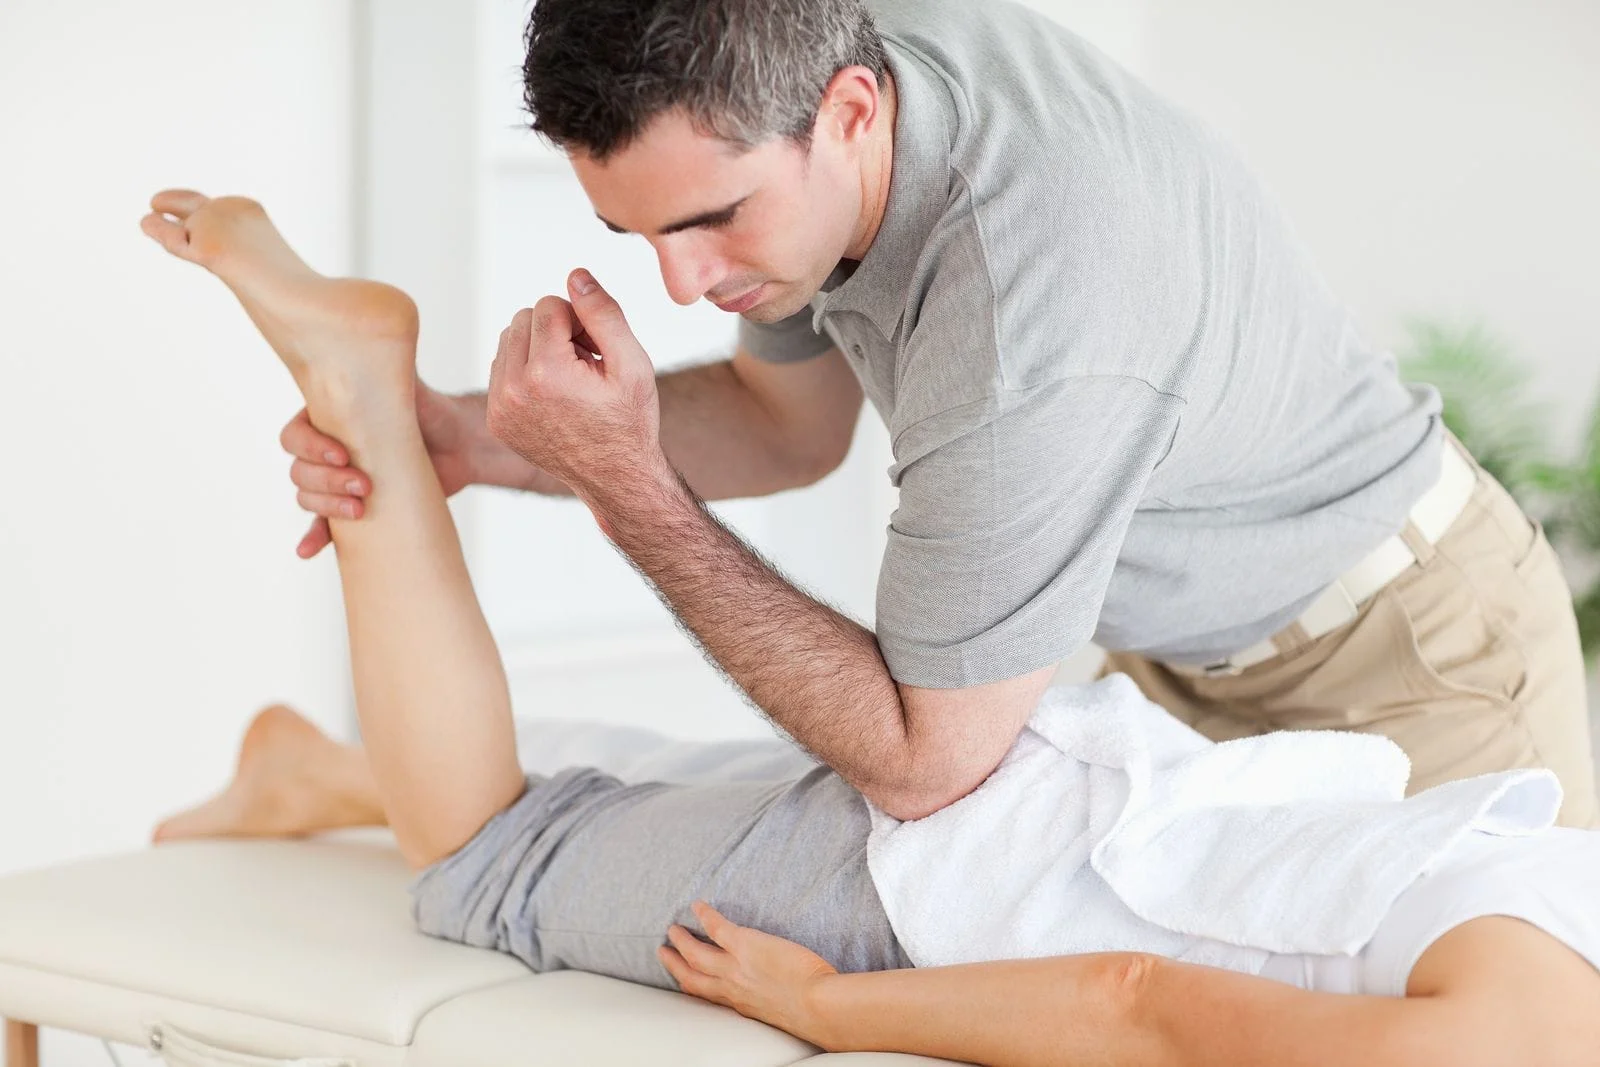 Keogh Reid Massage - Many of us suffer from sciatic pain and it can be  debilitating. Raynor Massage can massively help relieve the symptoms caused  by sciatica. I have many regular clients